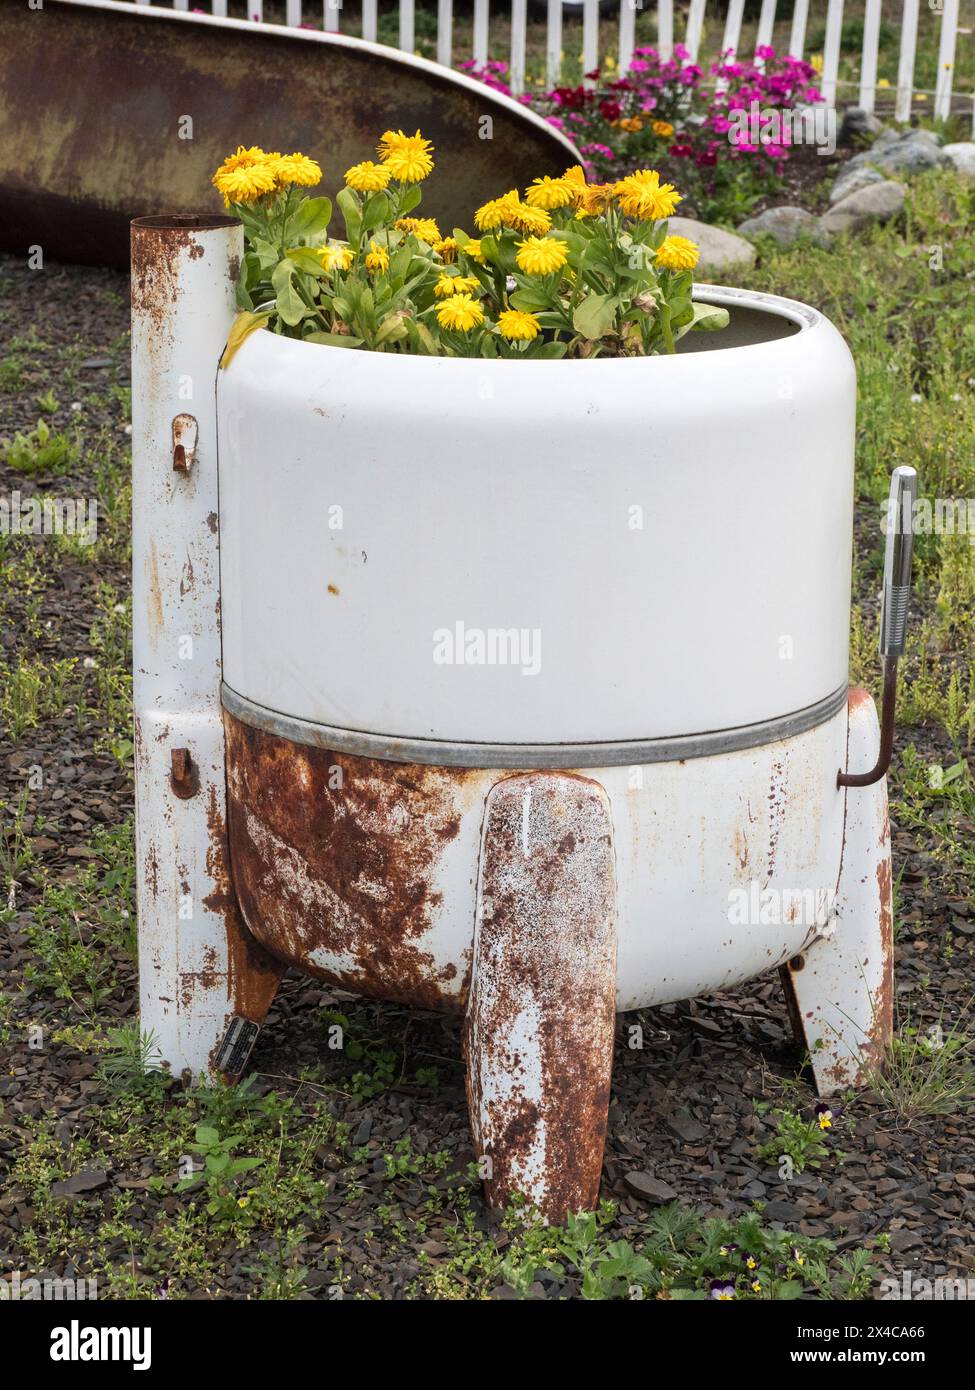 USA, Alaska. Old antique washing machine with flowers planted inside. Stock Photo